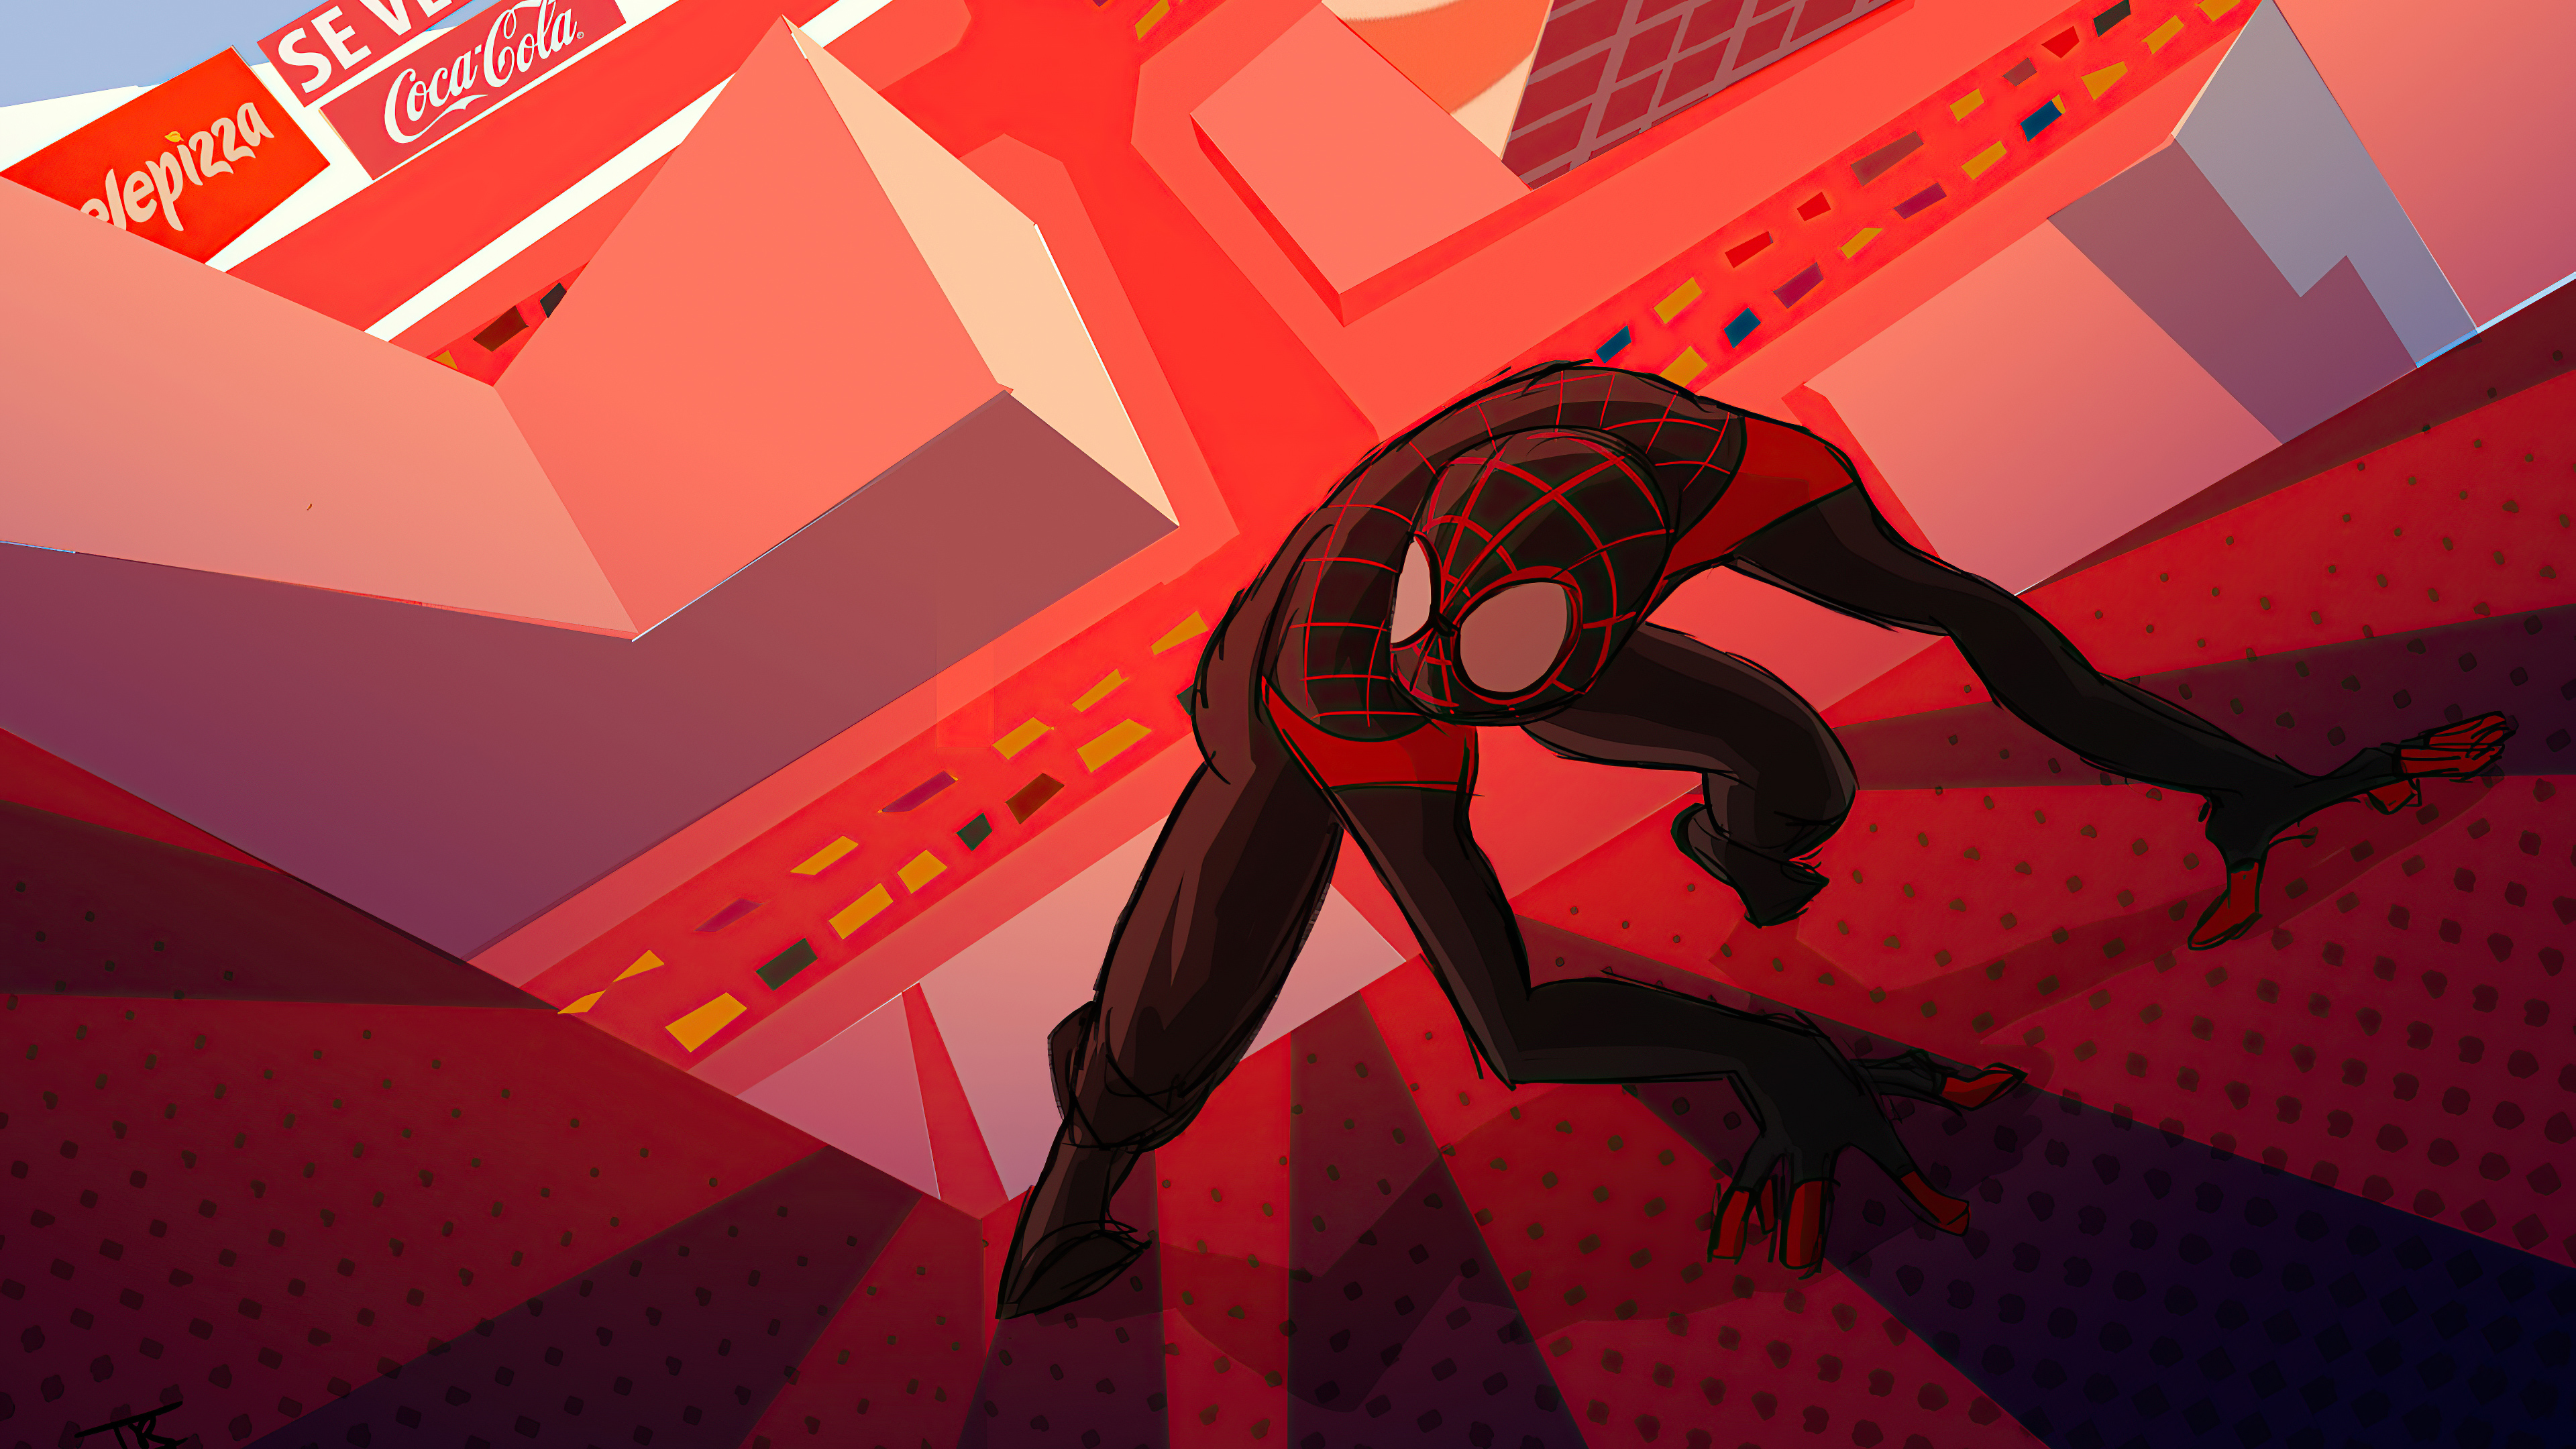 Spider-Man: Into The Spider-Verse 4k Ultra HD Wallpaper by Ivi Rodriguez